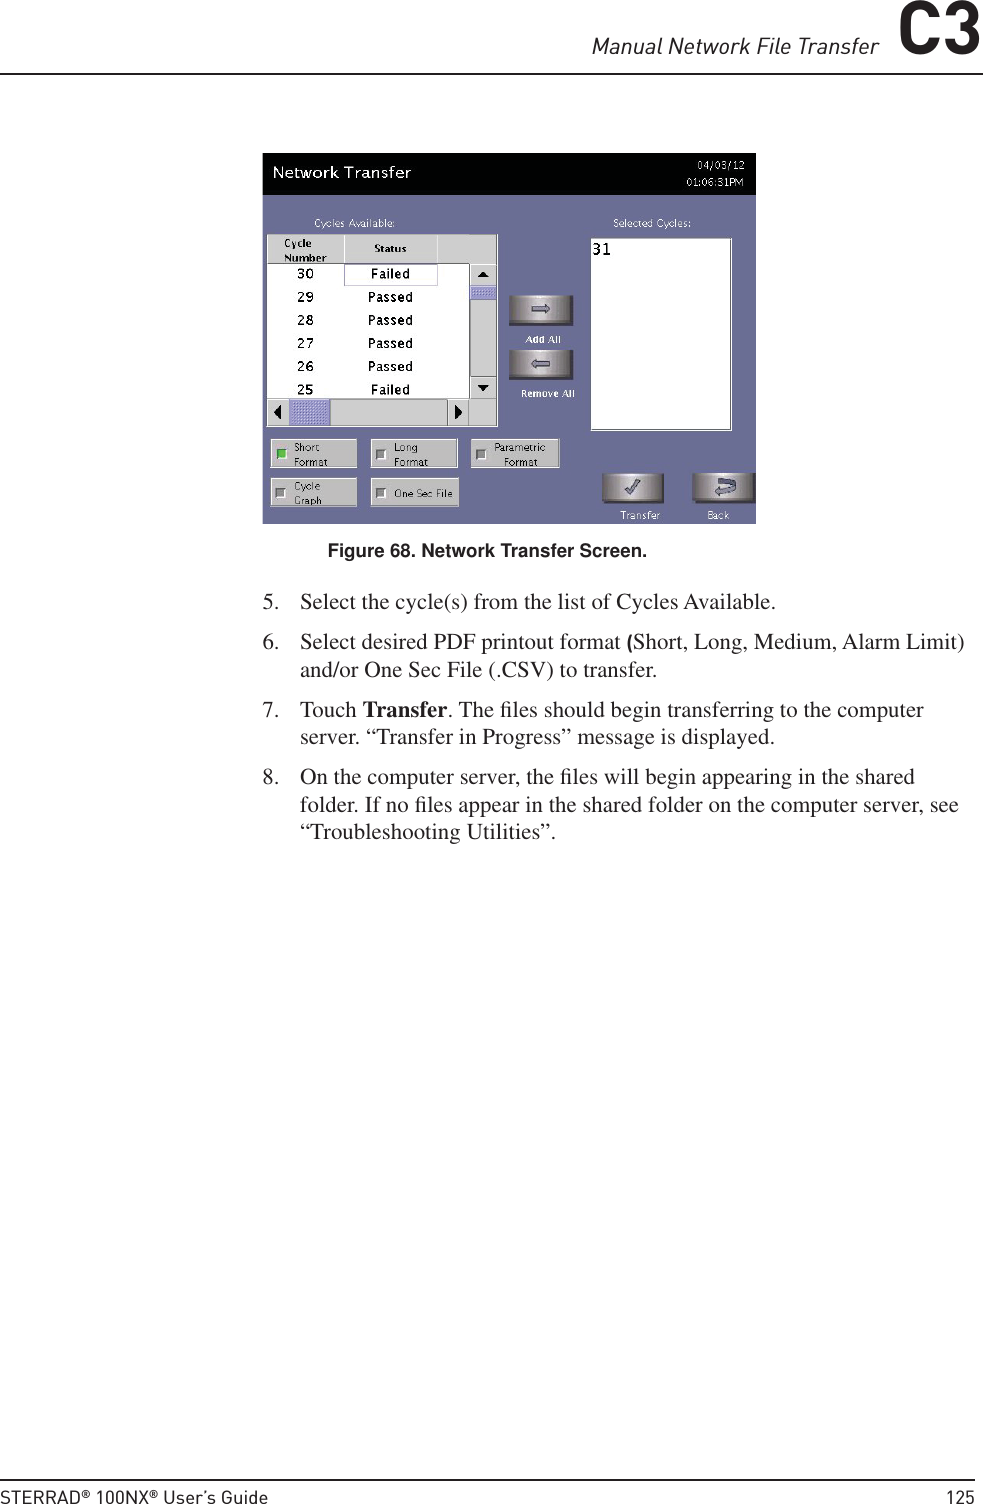 Manual Network File Transfer C3STERRAD® 100NX® User’s Guide  125Figure 68. Network Transfer Screen.5.  Select the cycle(s) from the list of Cycles Available.6.  Select desired PDF printout format (Short, Long, Medium, Alarm Limit) and/or One Sec File (.CSV) to transfer.7. Touch Transfer. The ﬁ les should begin transferring to the computer server. “Transfer in Progress” message is displayed.8.  On the computer server, the ﬁ les will begin appearing in the shared folder. If no ﬁ les appear in the shared folder on the computer server, see “Troubleshooting Utilities”.